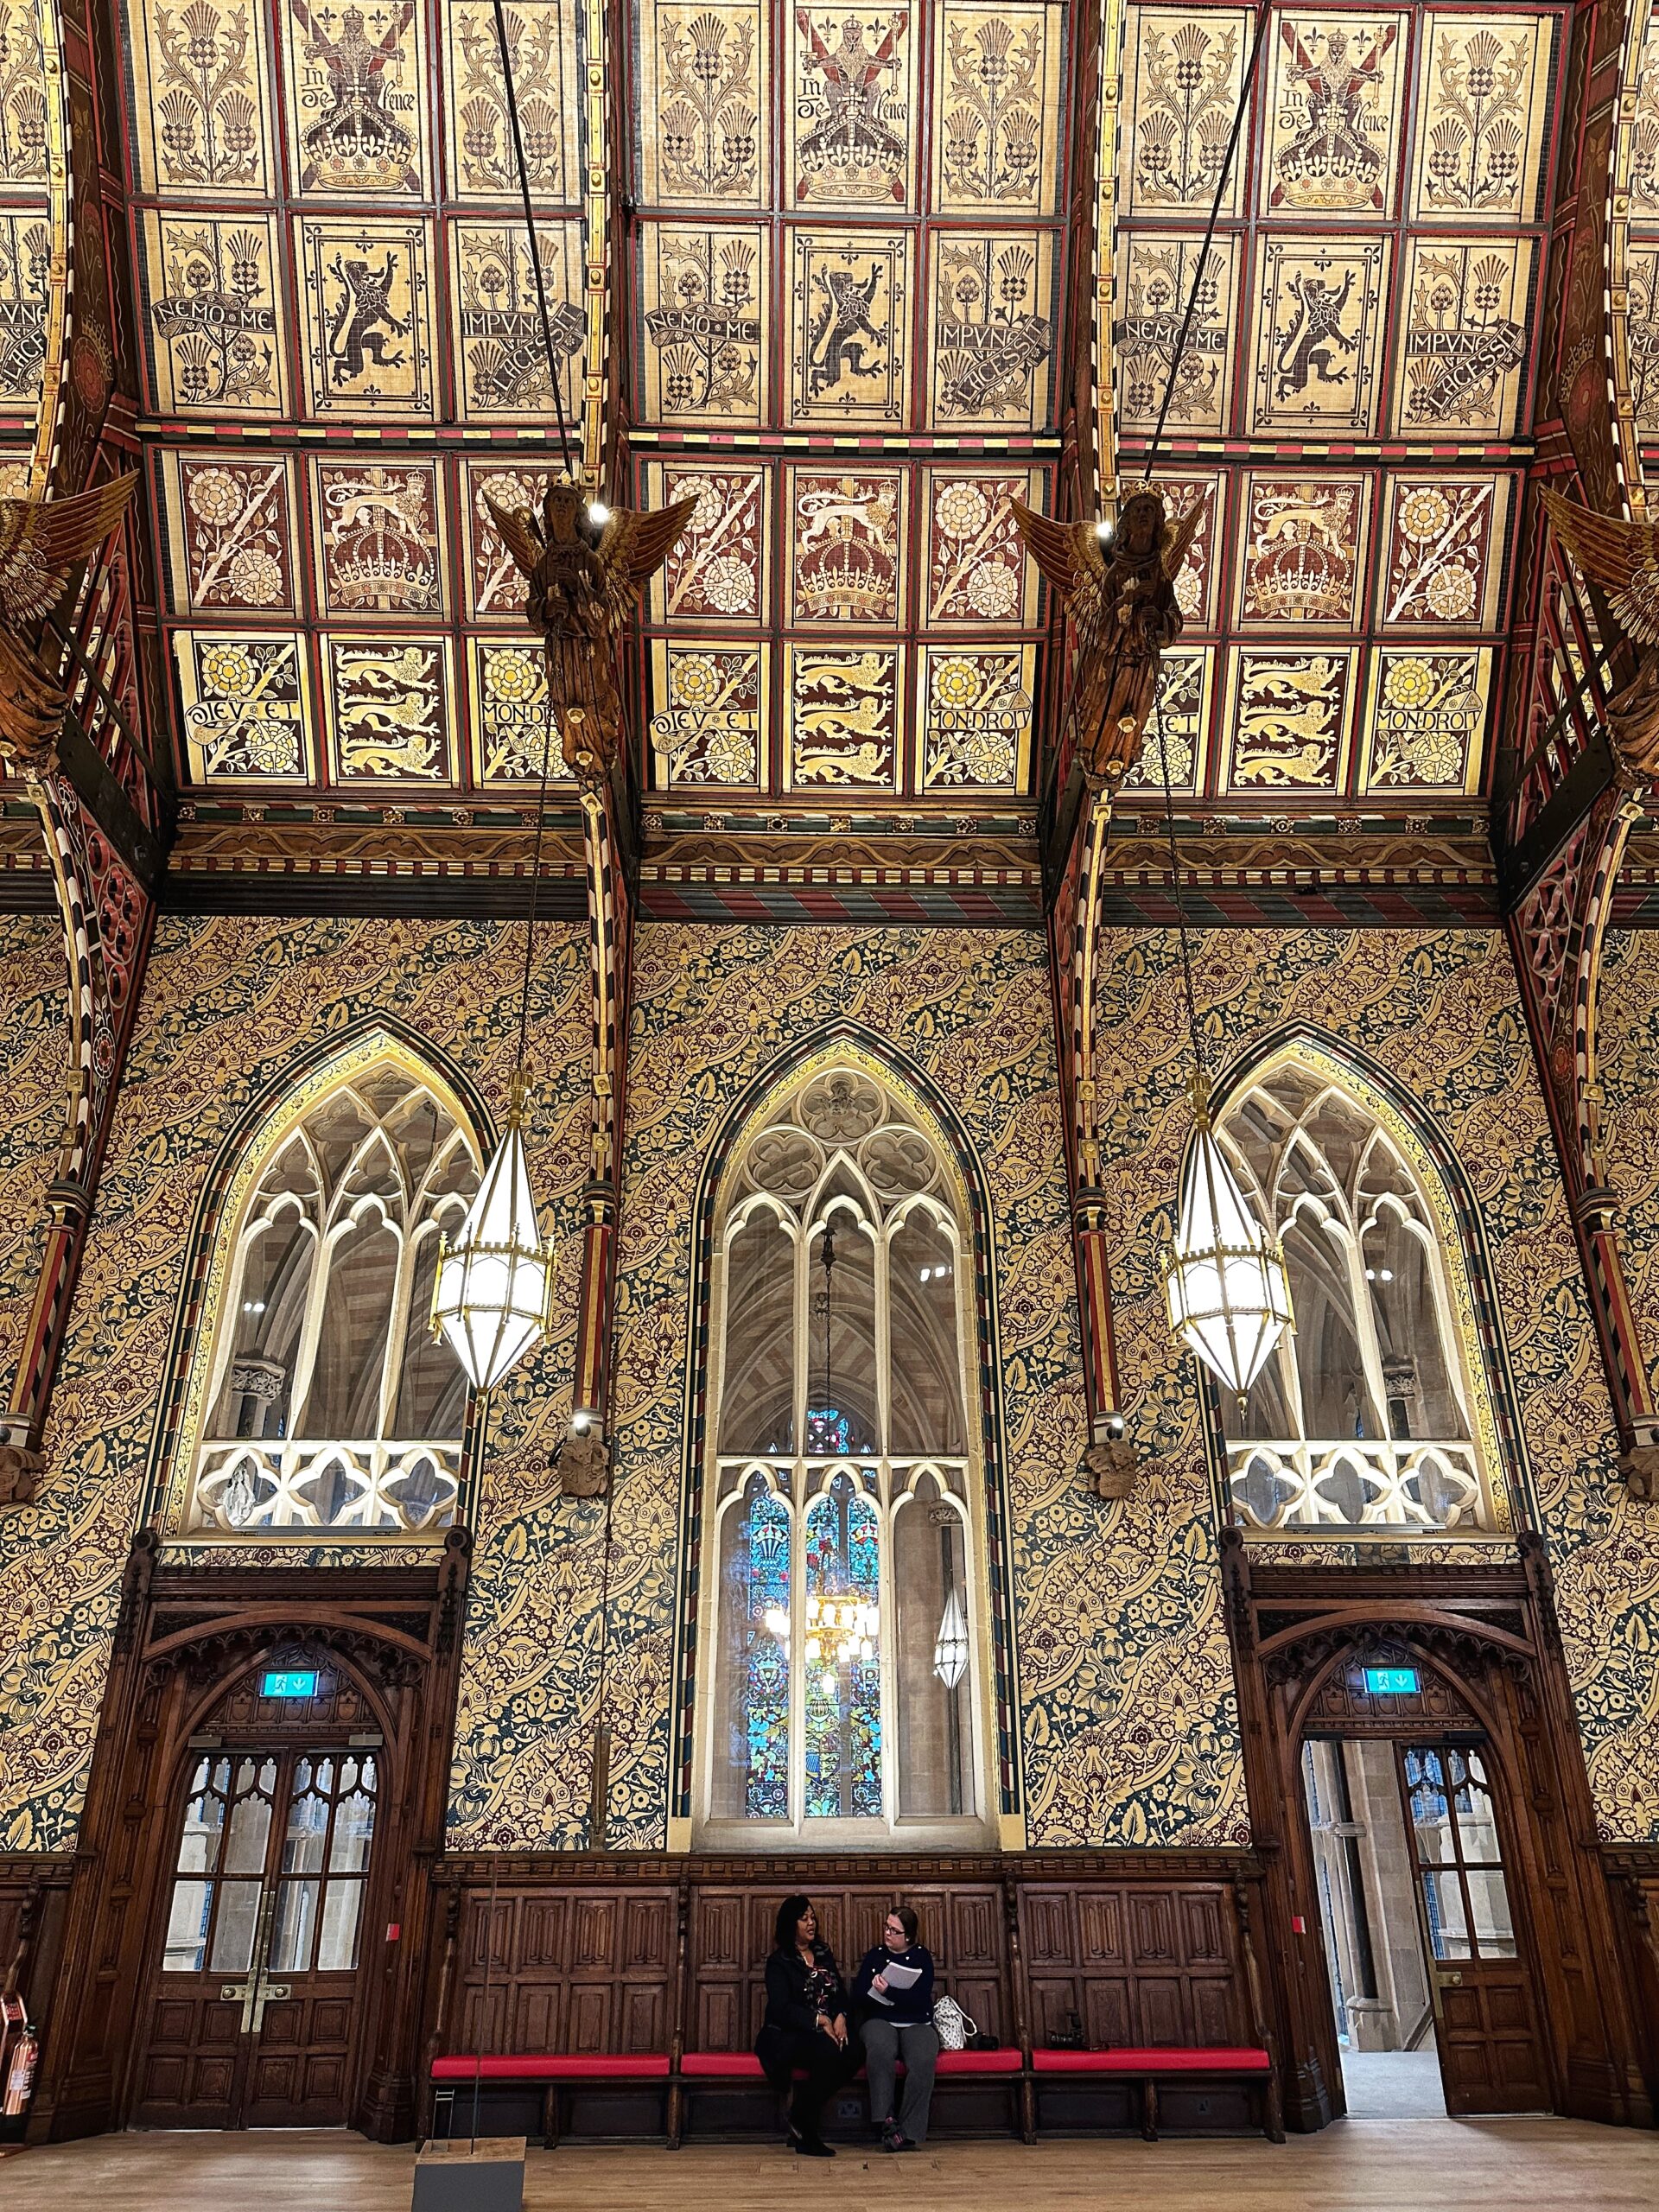 Details of the Great Hall at Rochdale Town Hall. Credit: The Manc Group